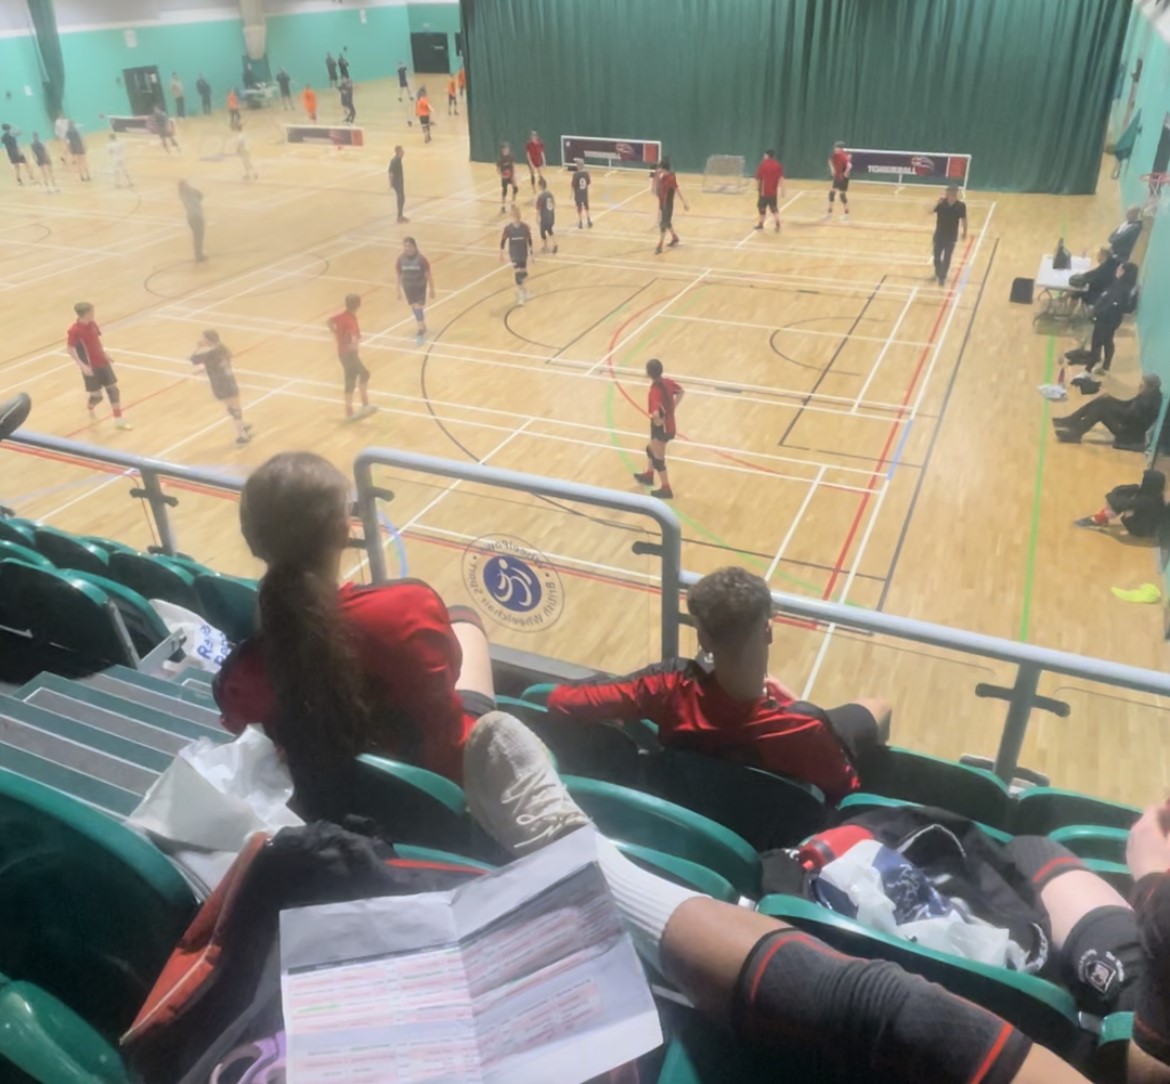 On Friday 19th April, 6 of our Yr10's travelled to Aylesbury to take part in the National Tchoukball Finals, along with 6 other schools. Tchoukball is a fast paced mixed gender, non-contact game, that requires teams to shoot a ball at a rebound net so that it bounces outside of